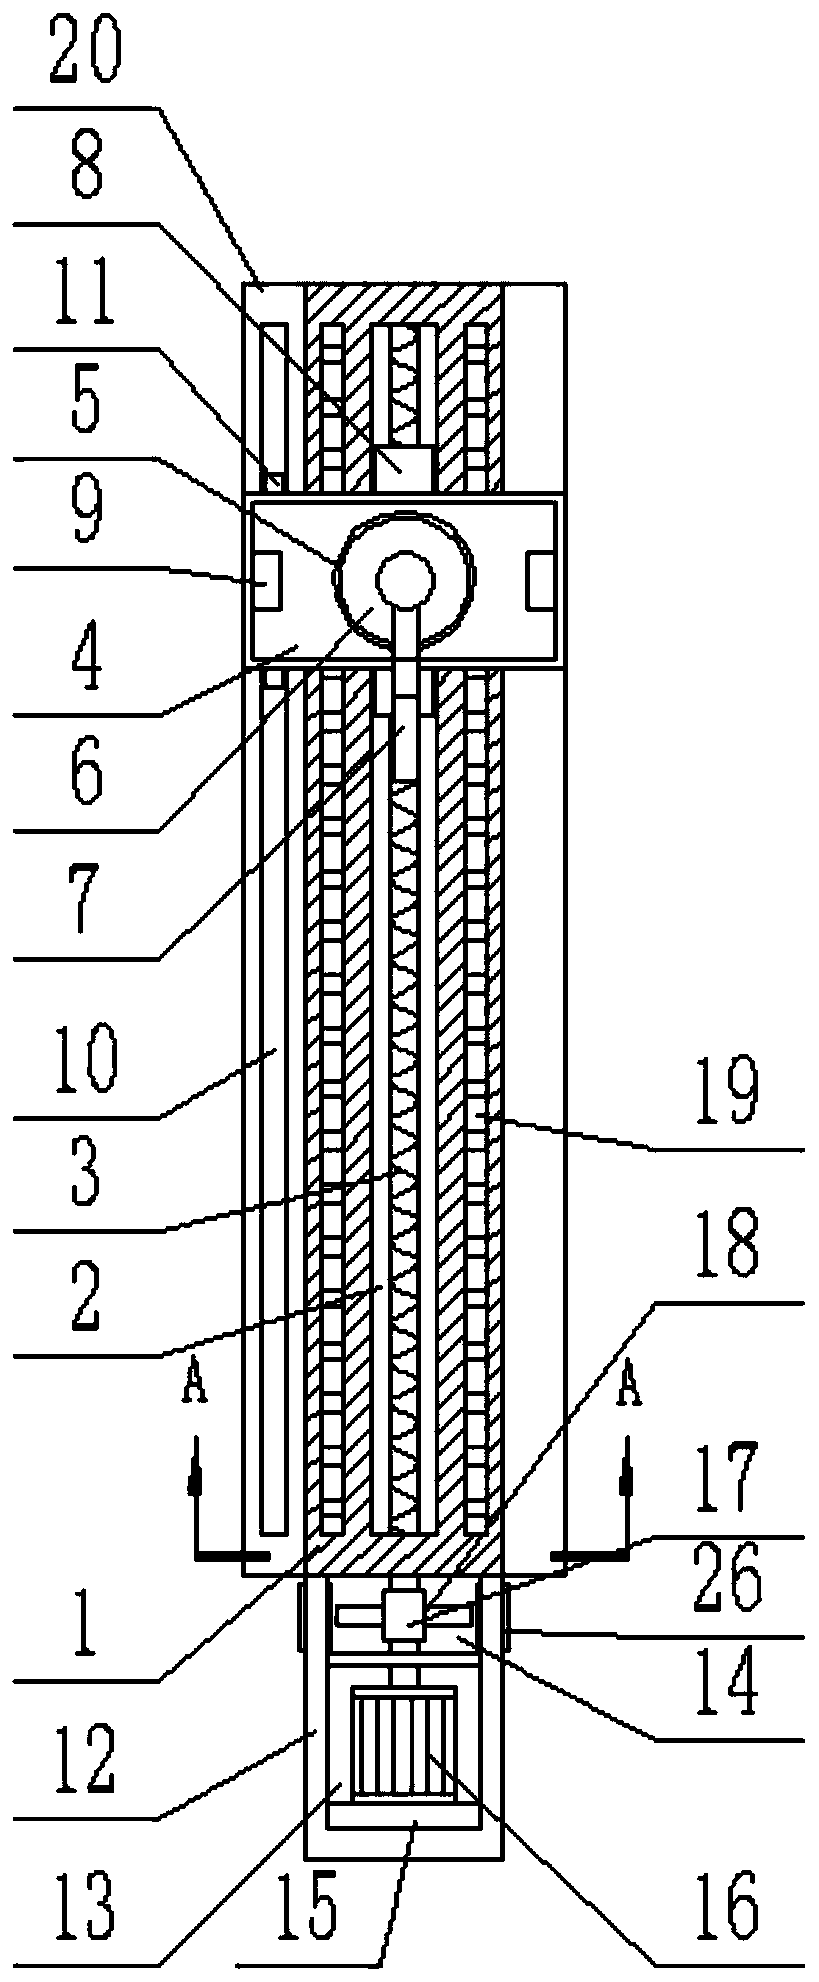 A combined support structure for toilet towel finishing